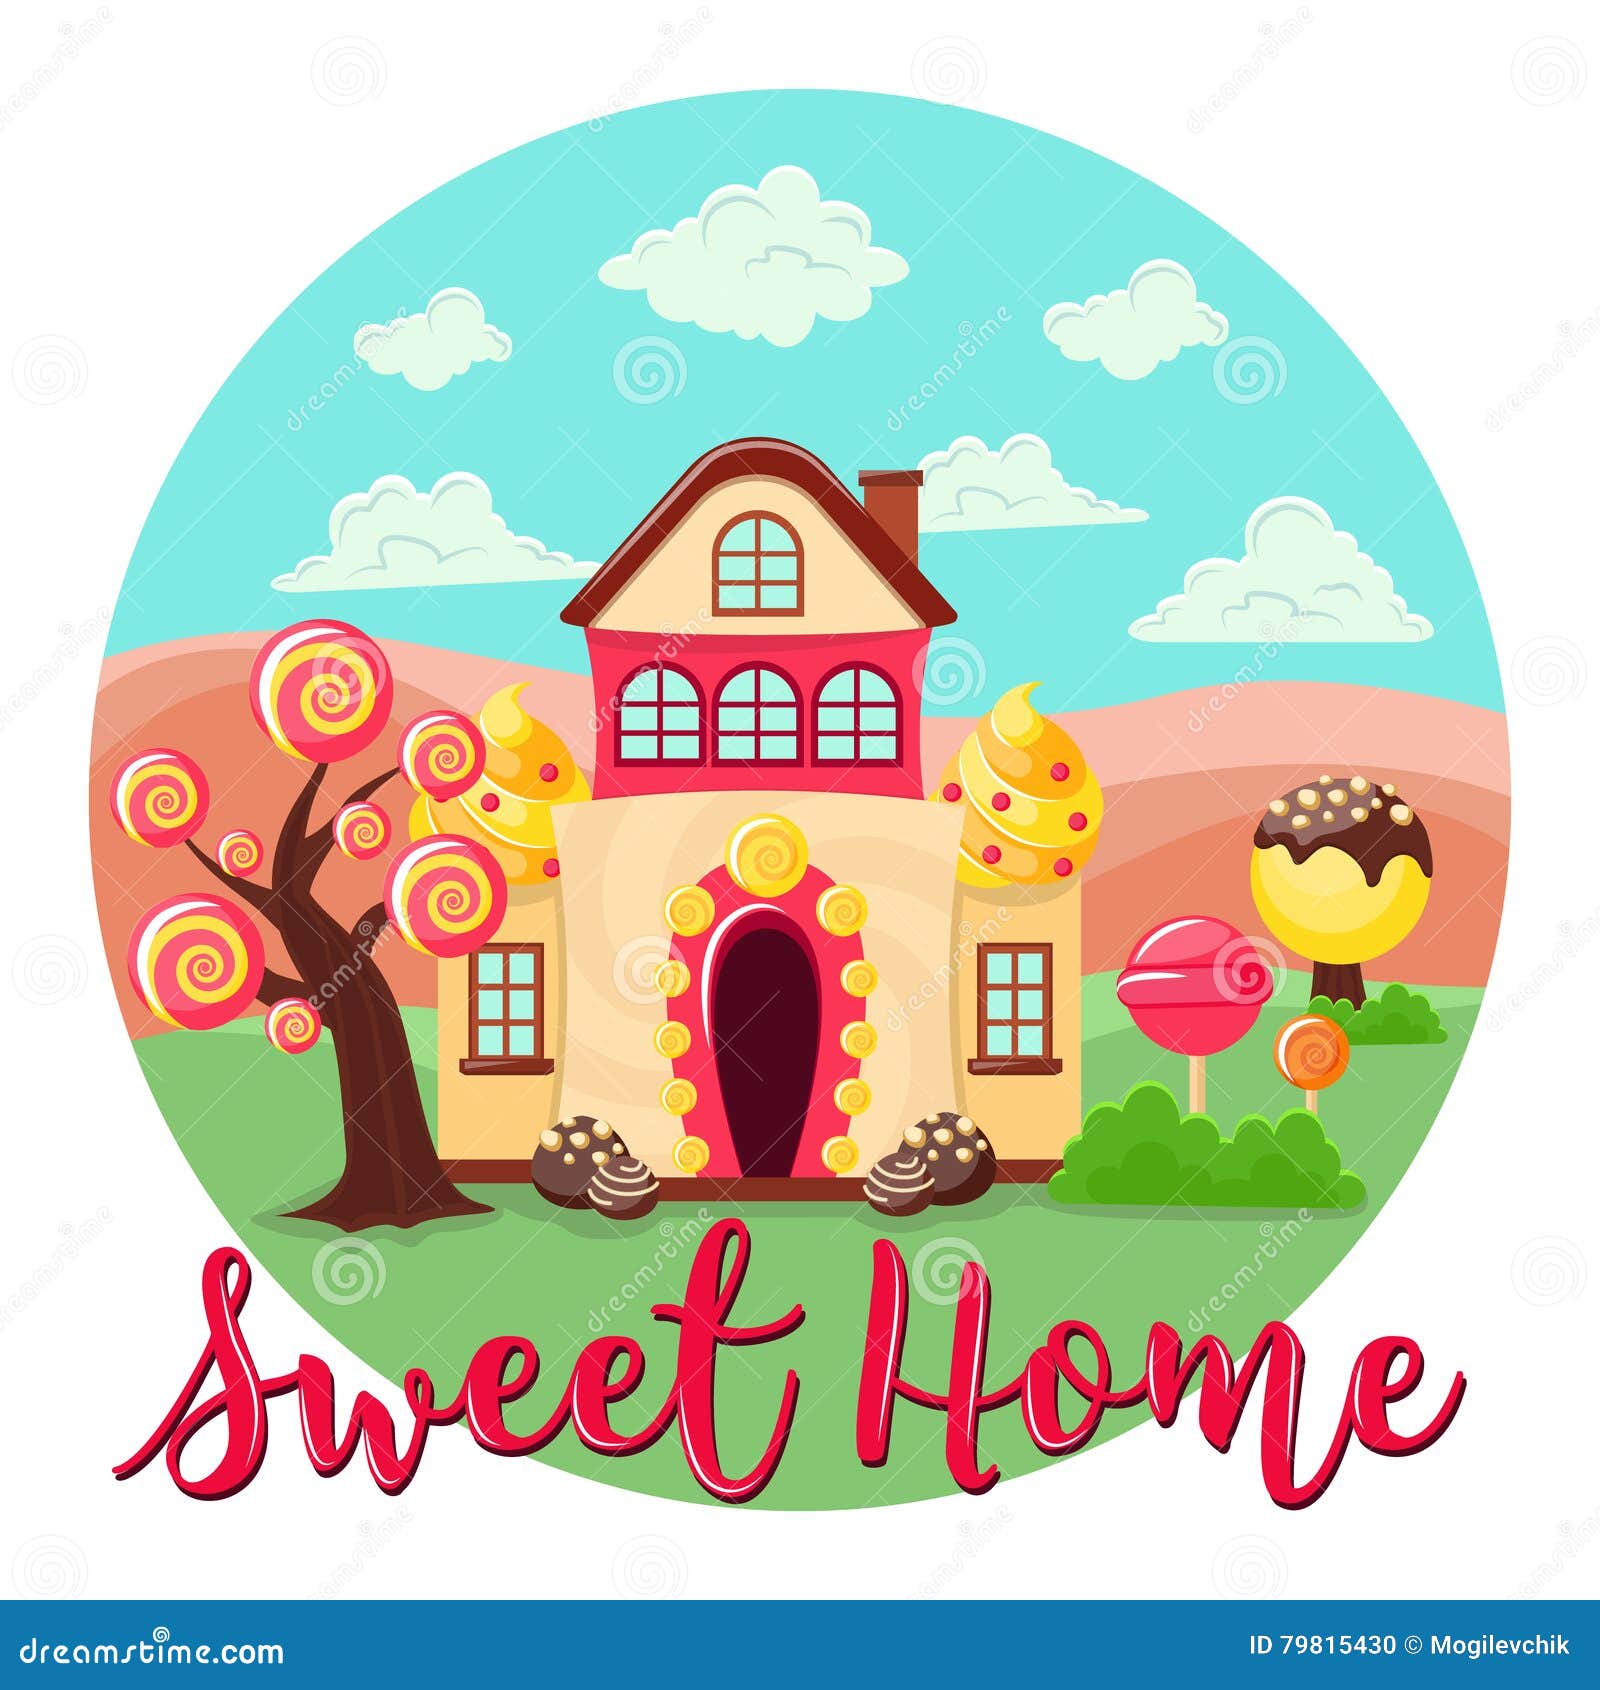 Sweet Home Round Composition Stock Vector - Illustration of fantasy,  caramel: 79815430